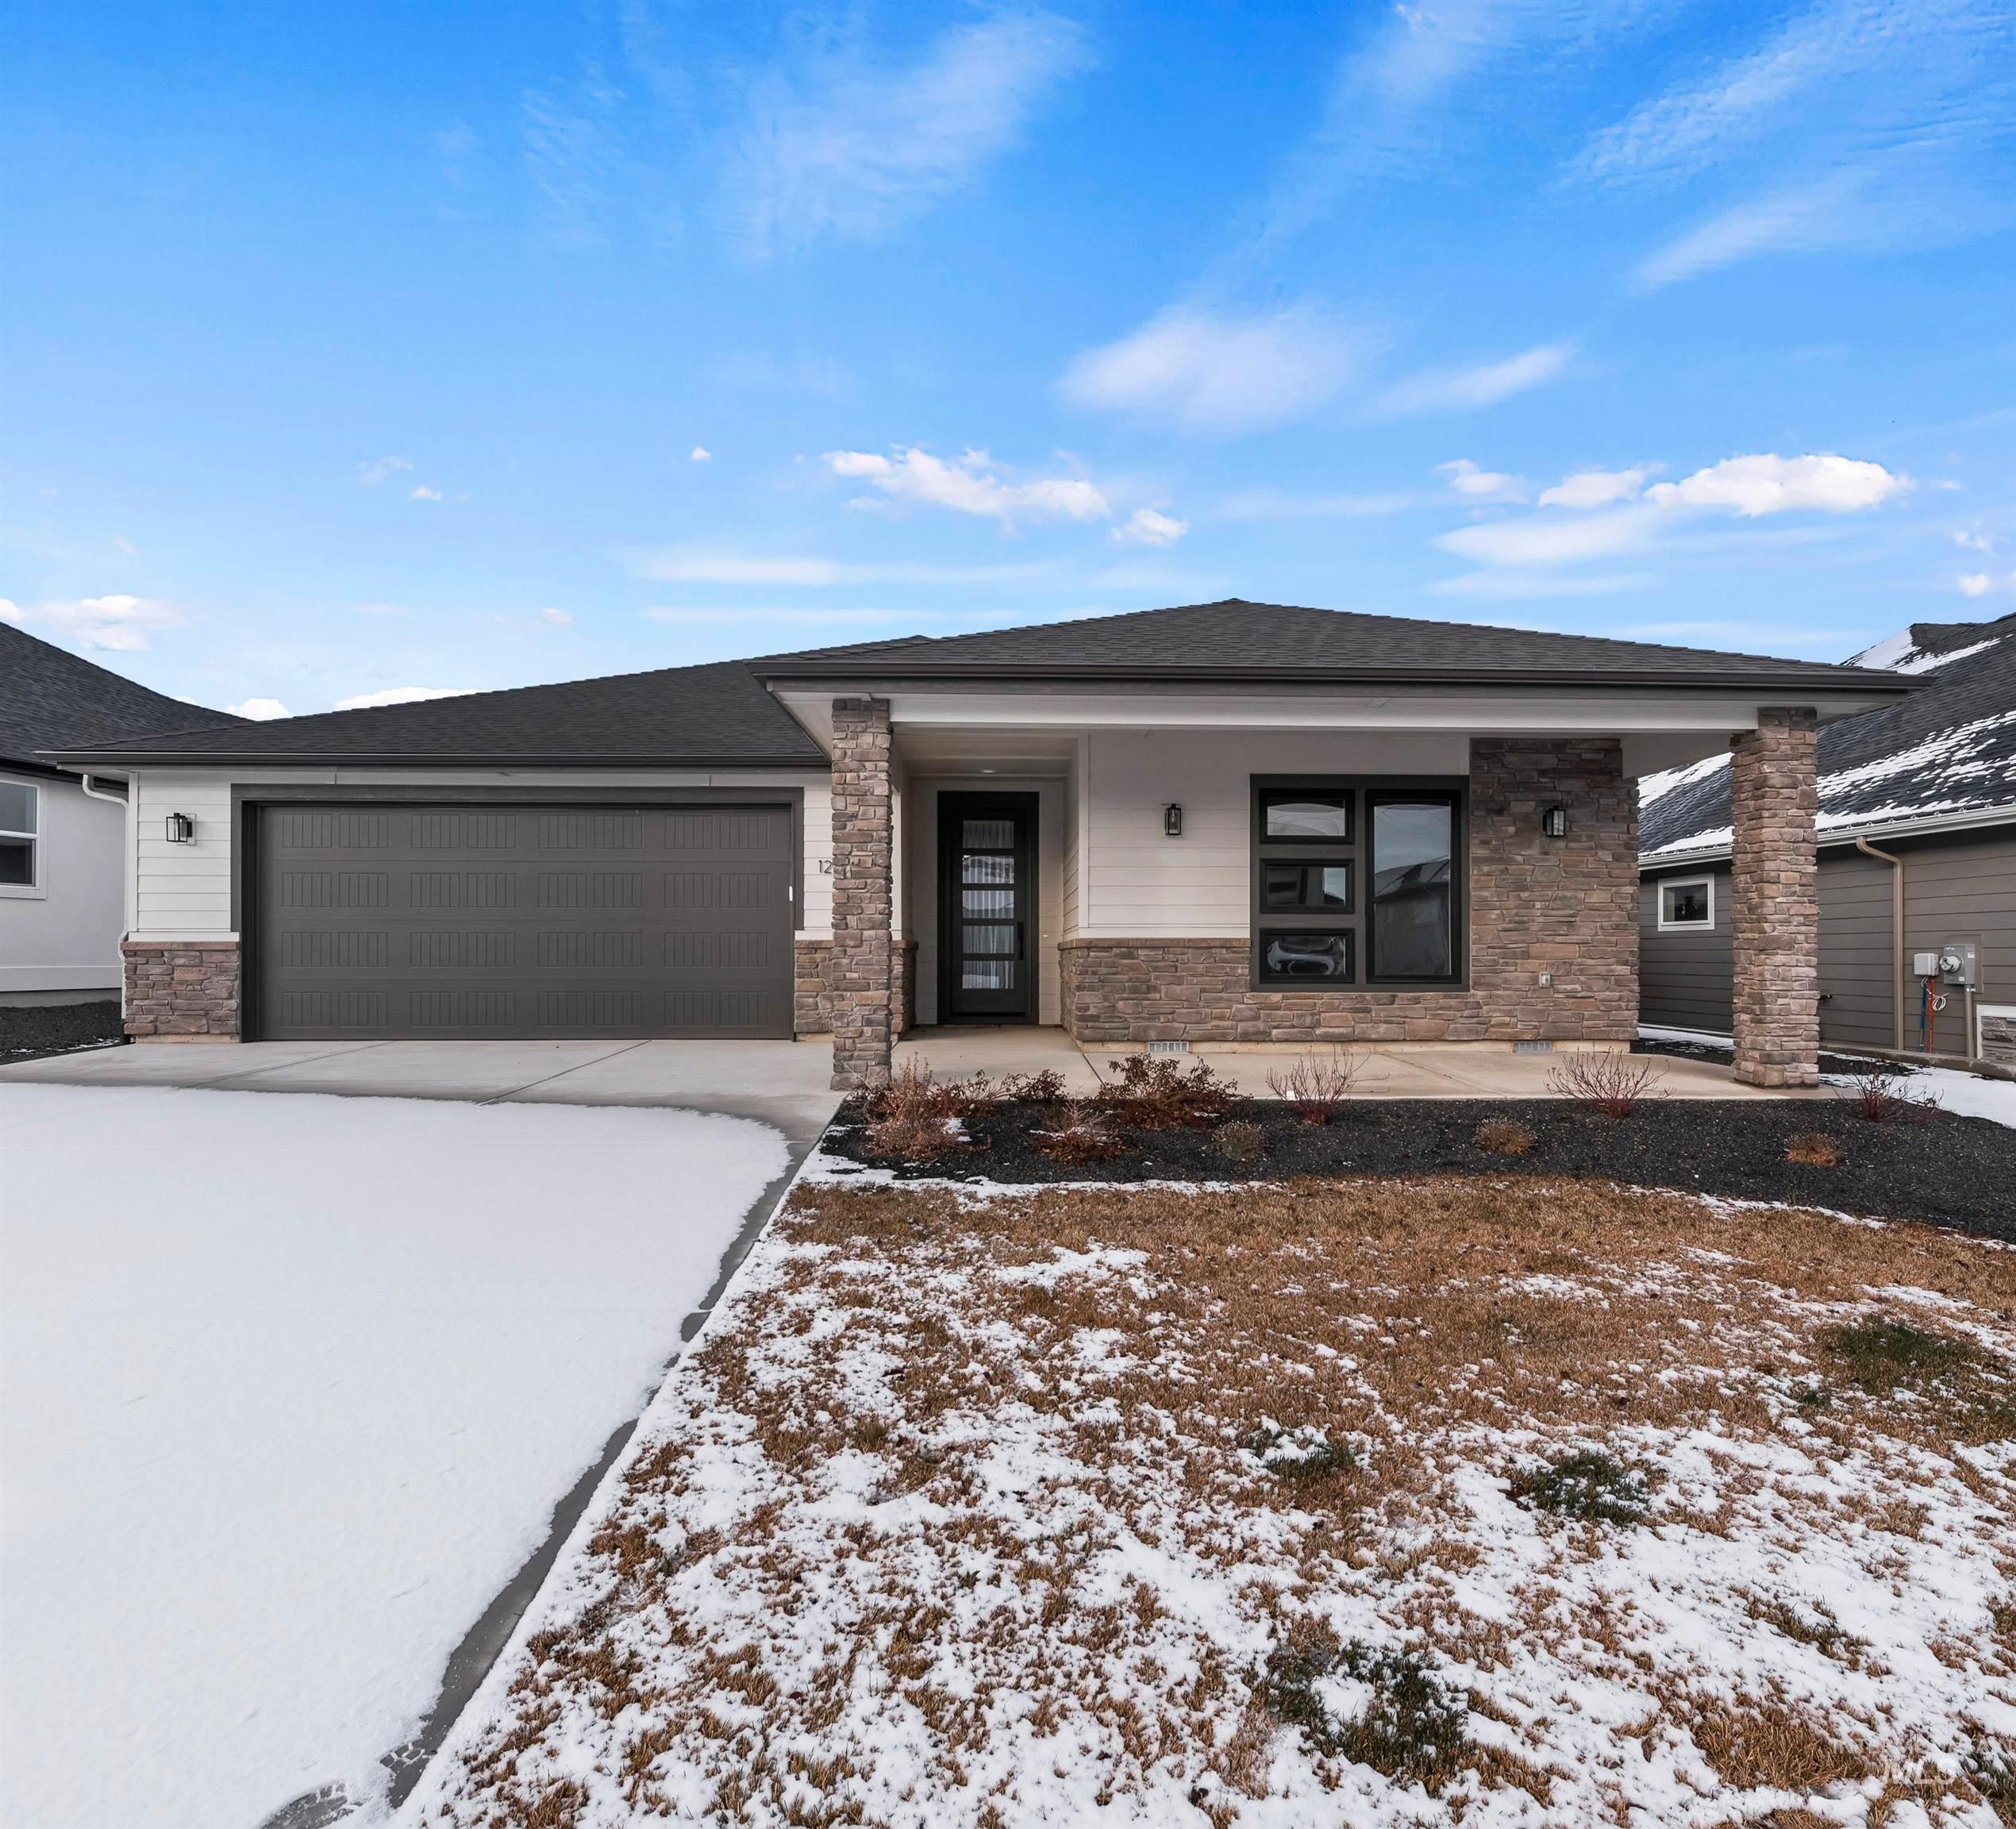 Nampa home for sale